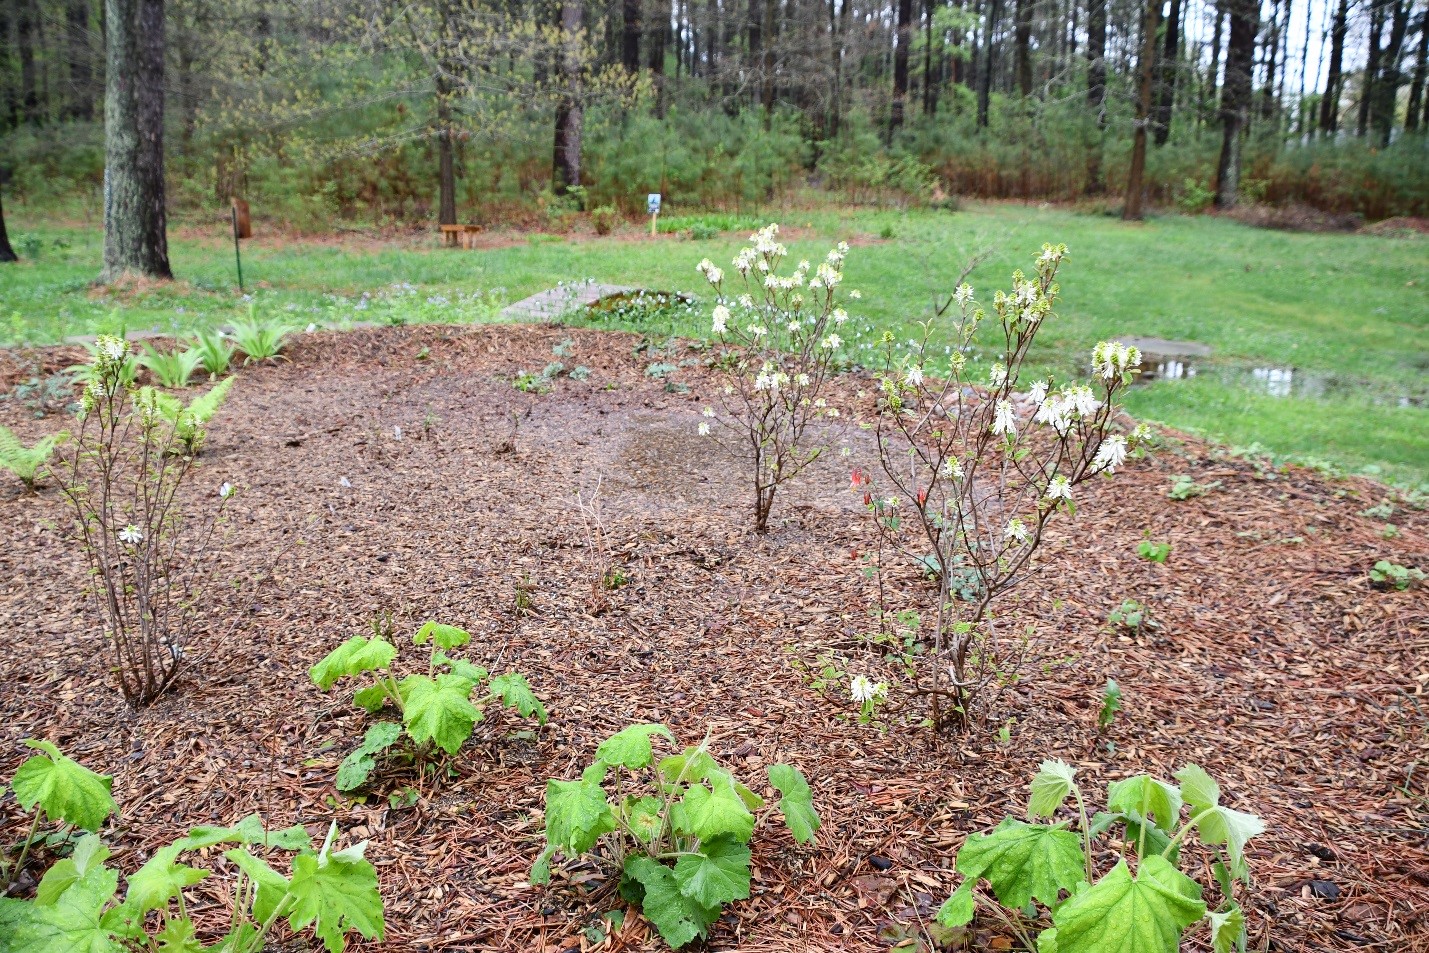 A rain garden can be both functional and attractive. The homeowner worked with the coordinator and contractor to select appropriate plants for inside the rain garden—plants happy to have “wet feet”—and for the berm along the edge.